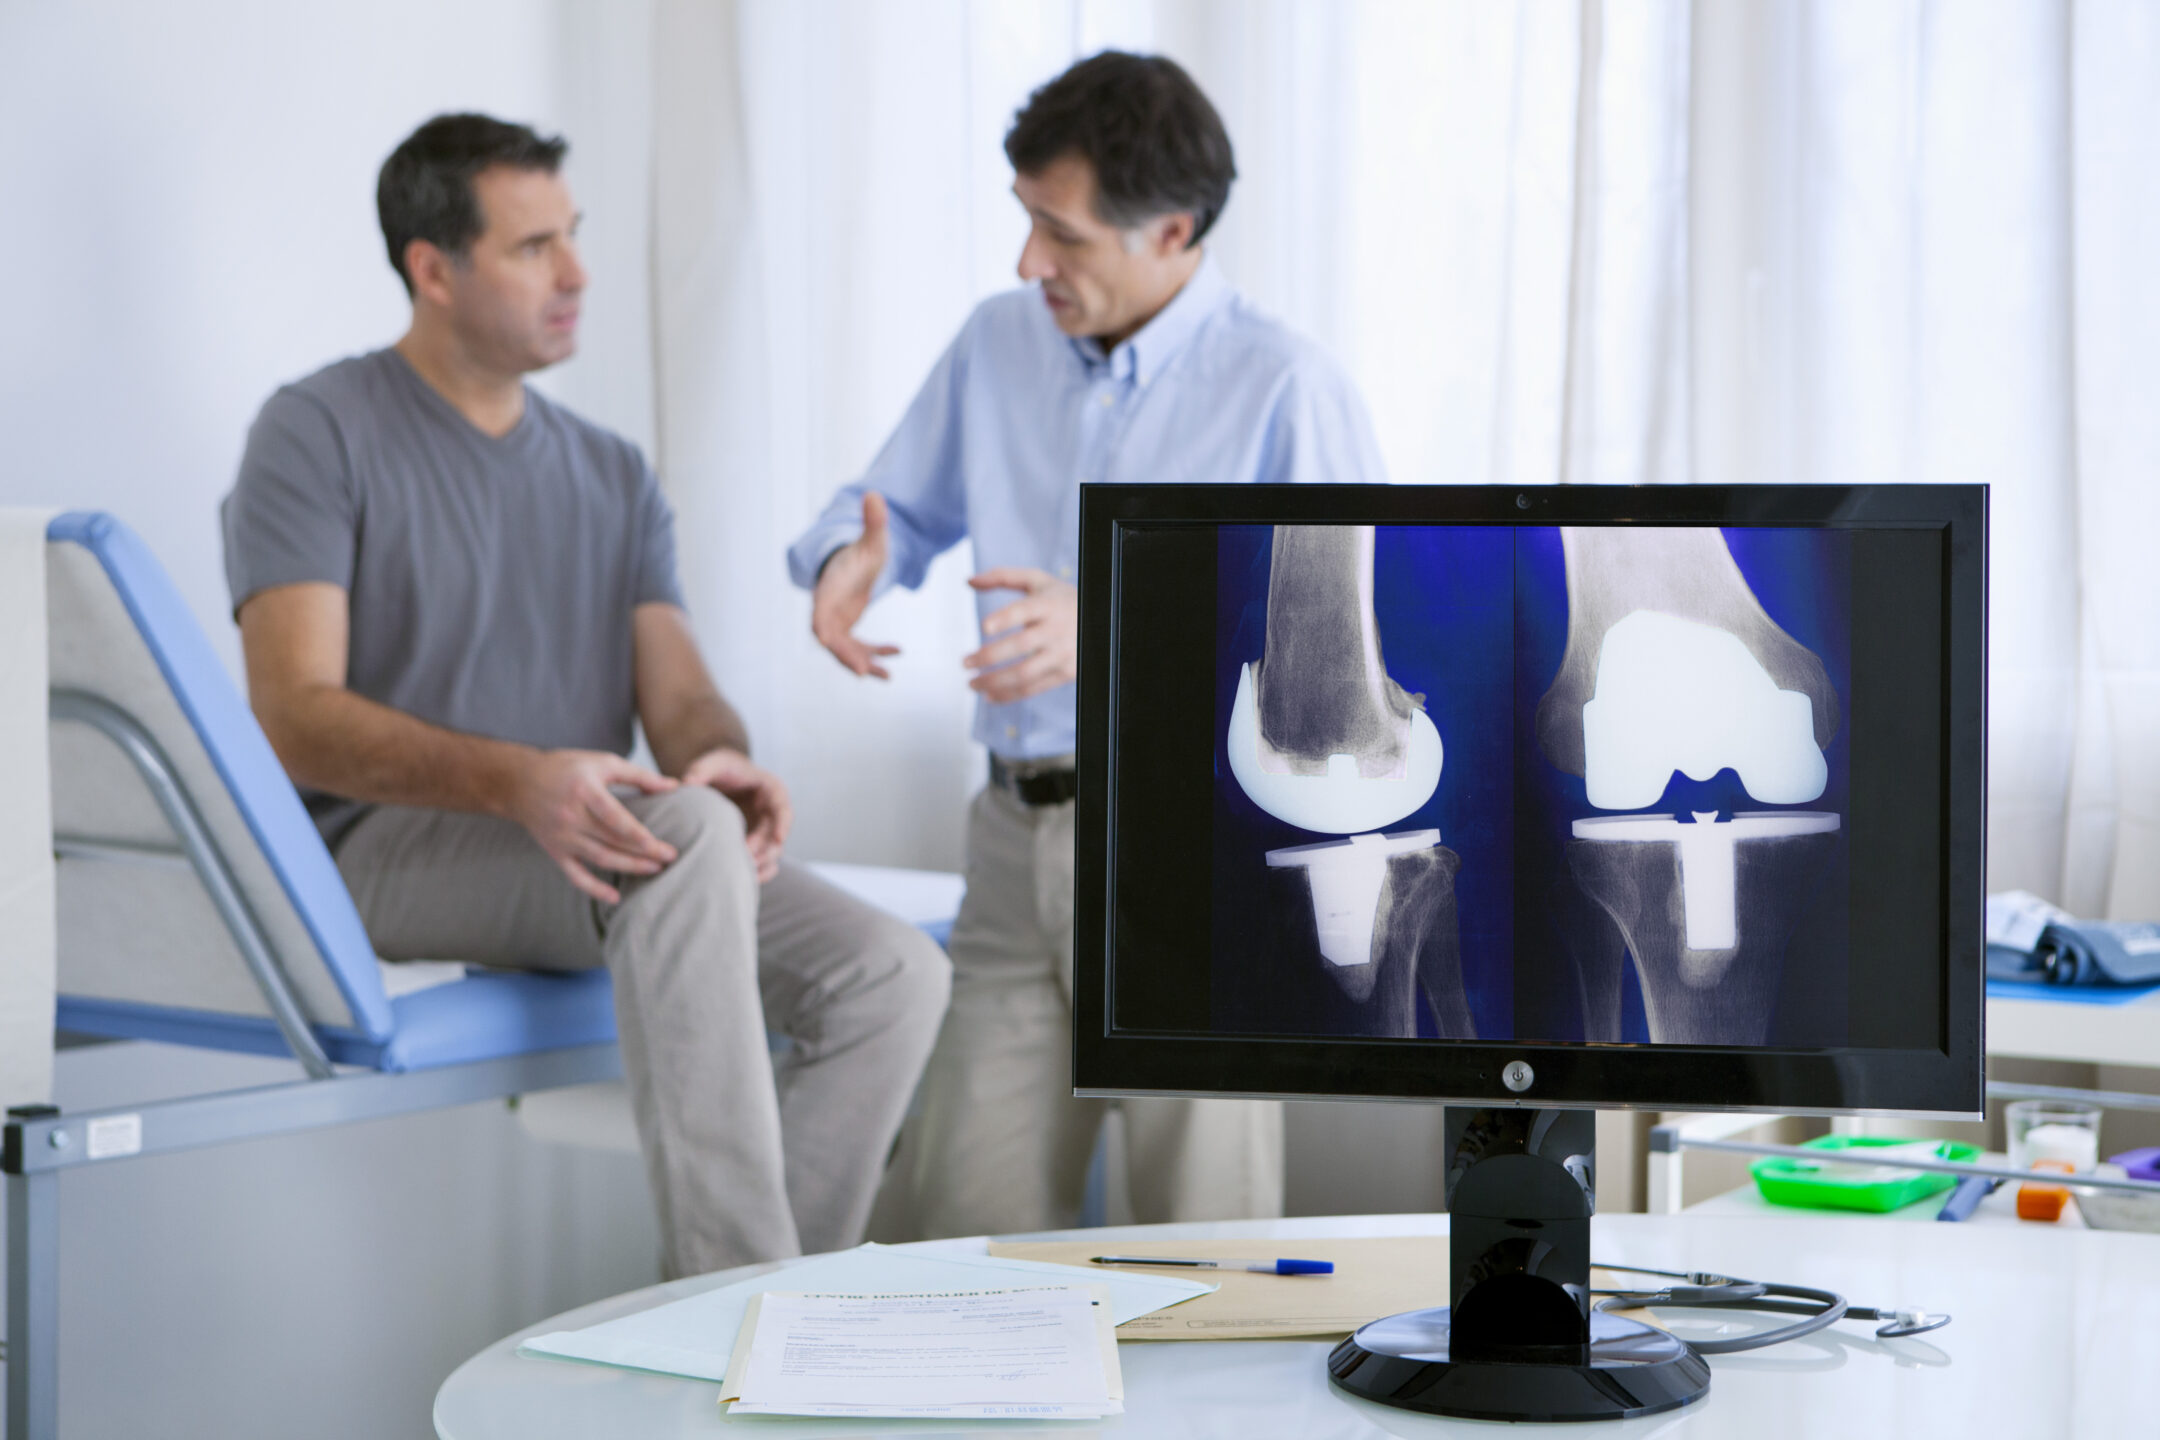 Orthopedic surgeon consults with a patient with a knee x-ray in the foreground. 